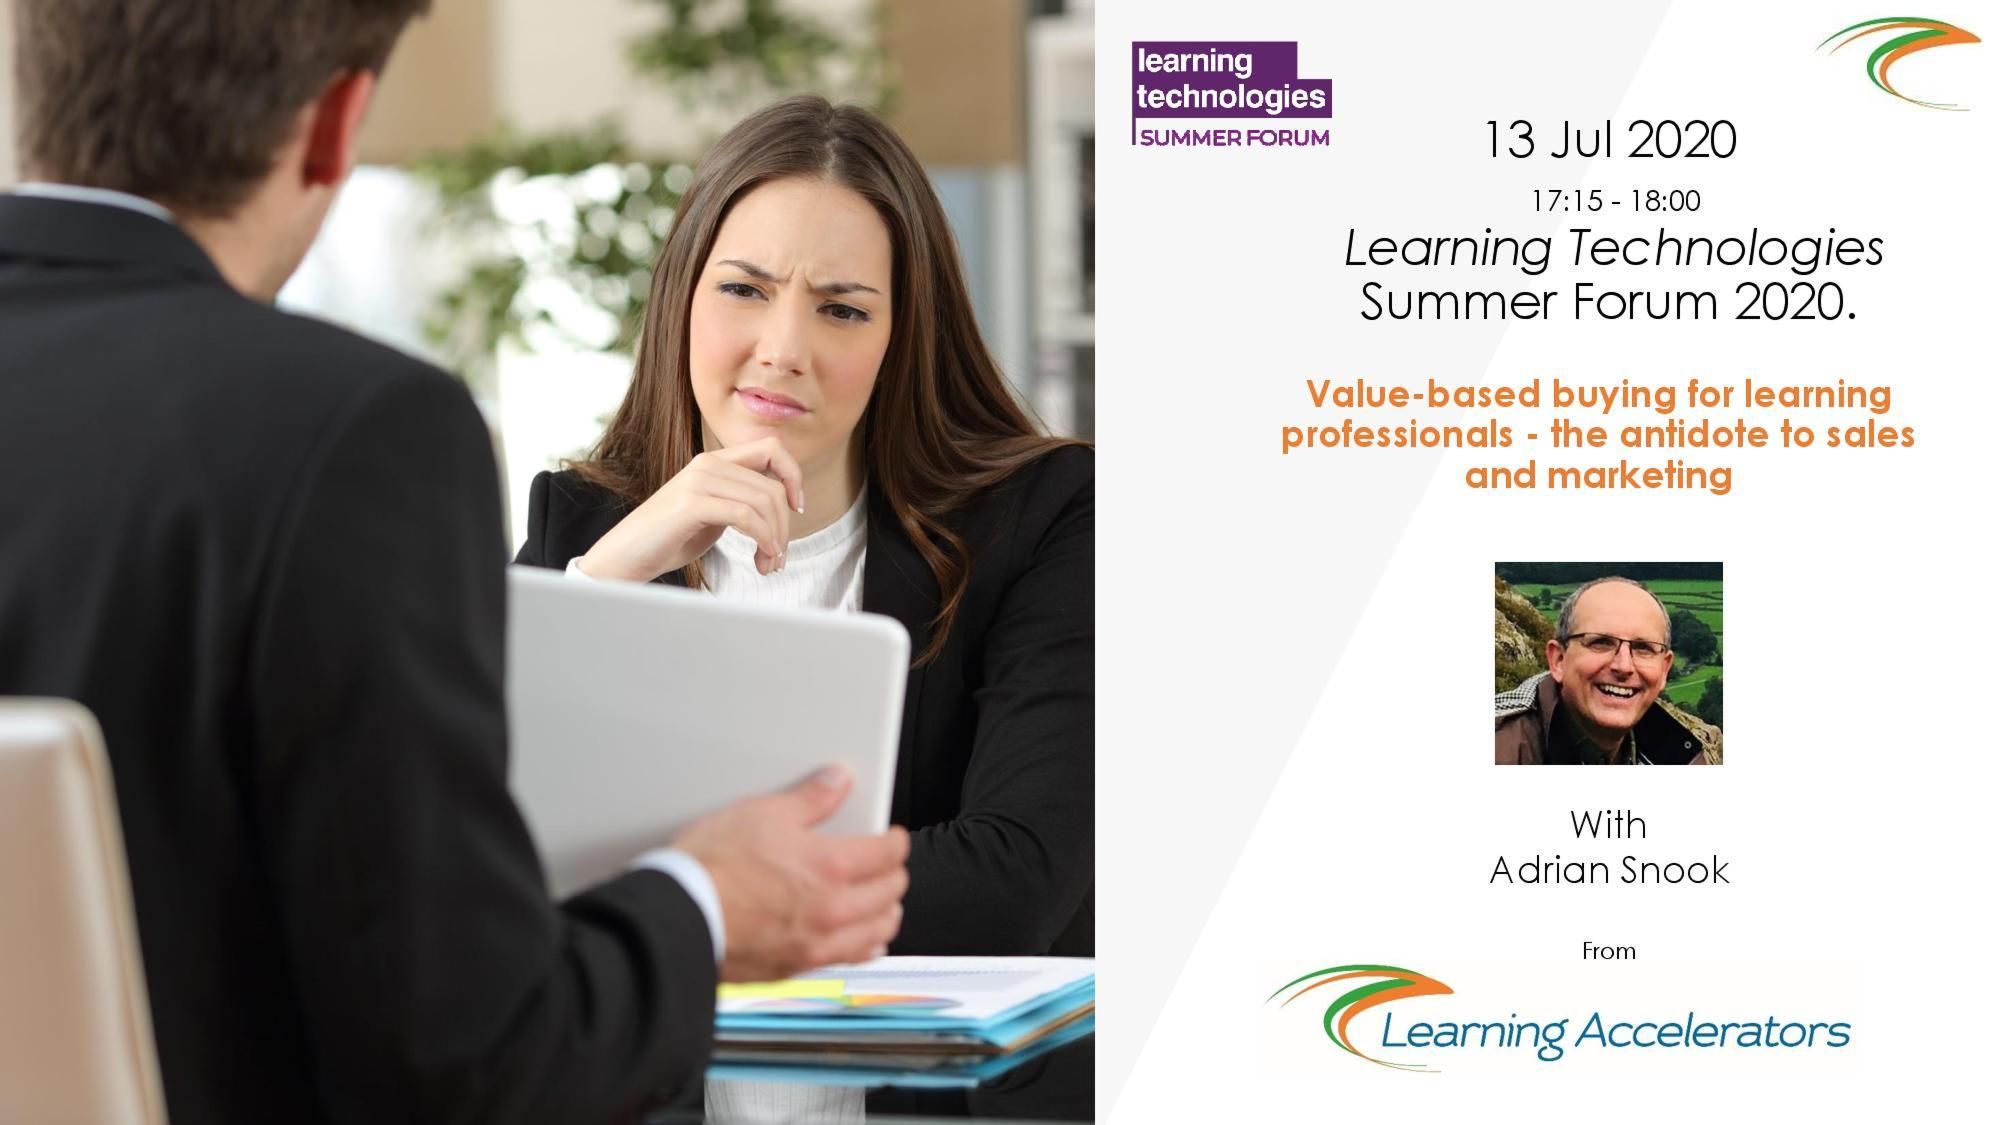 Value-based buying for learning professionals - the antidote to sales and marketing